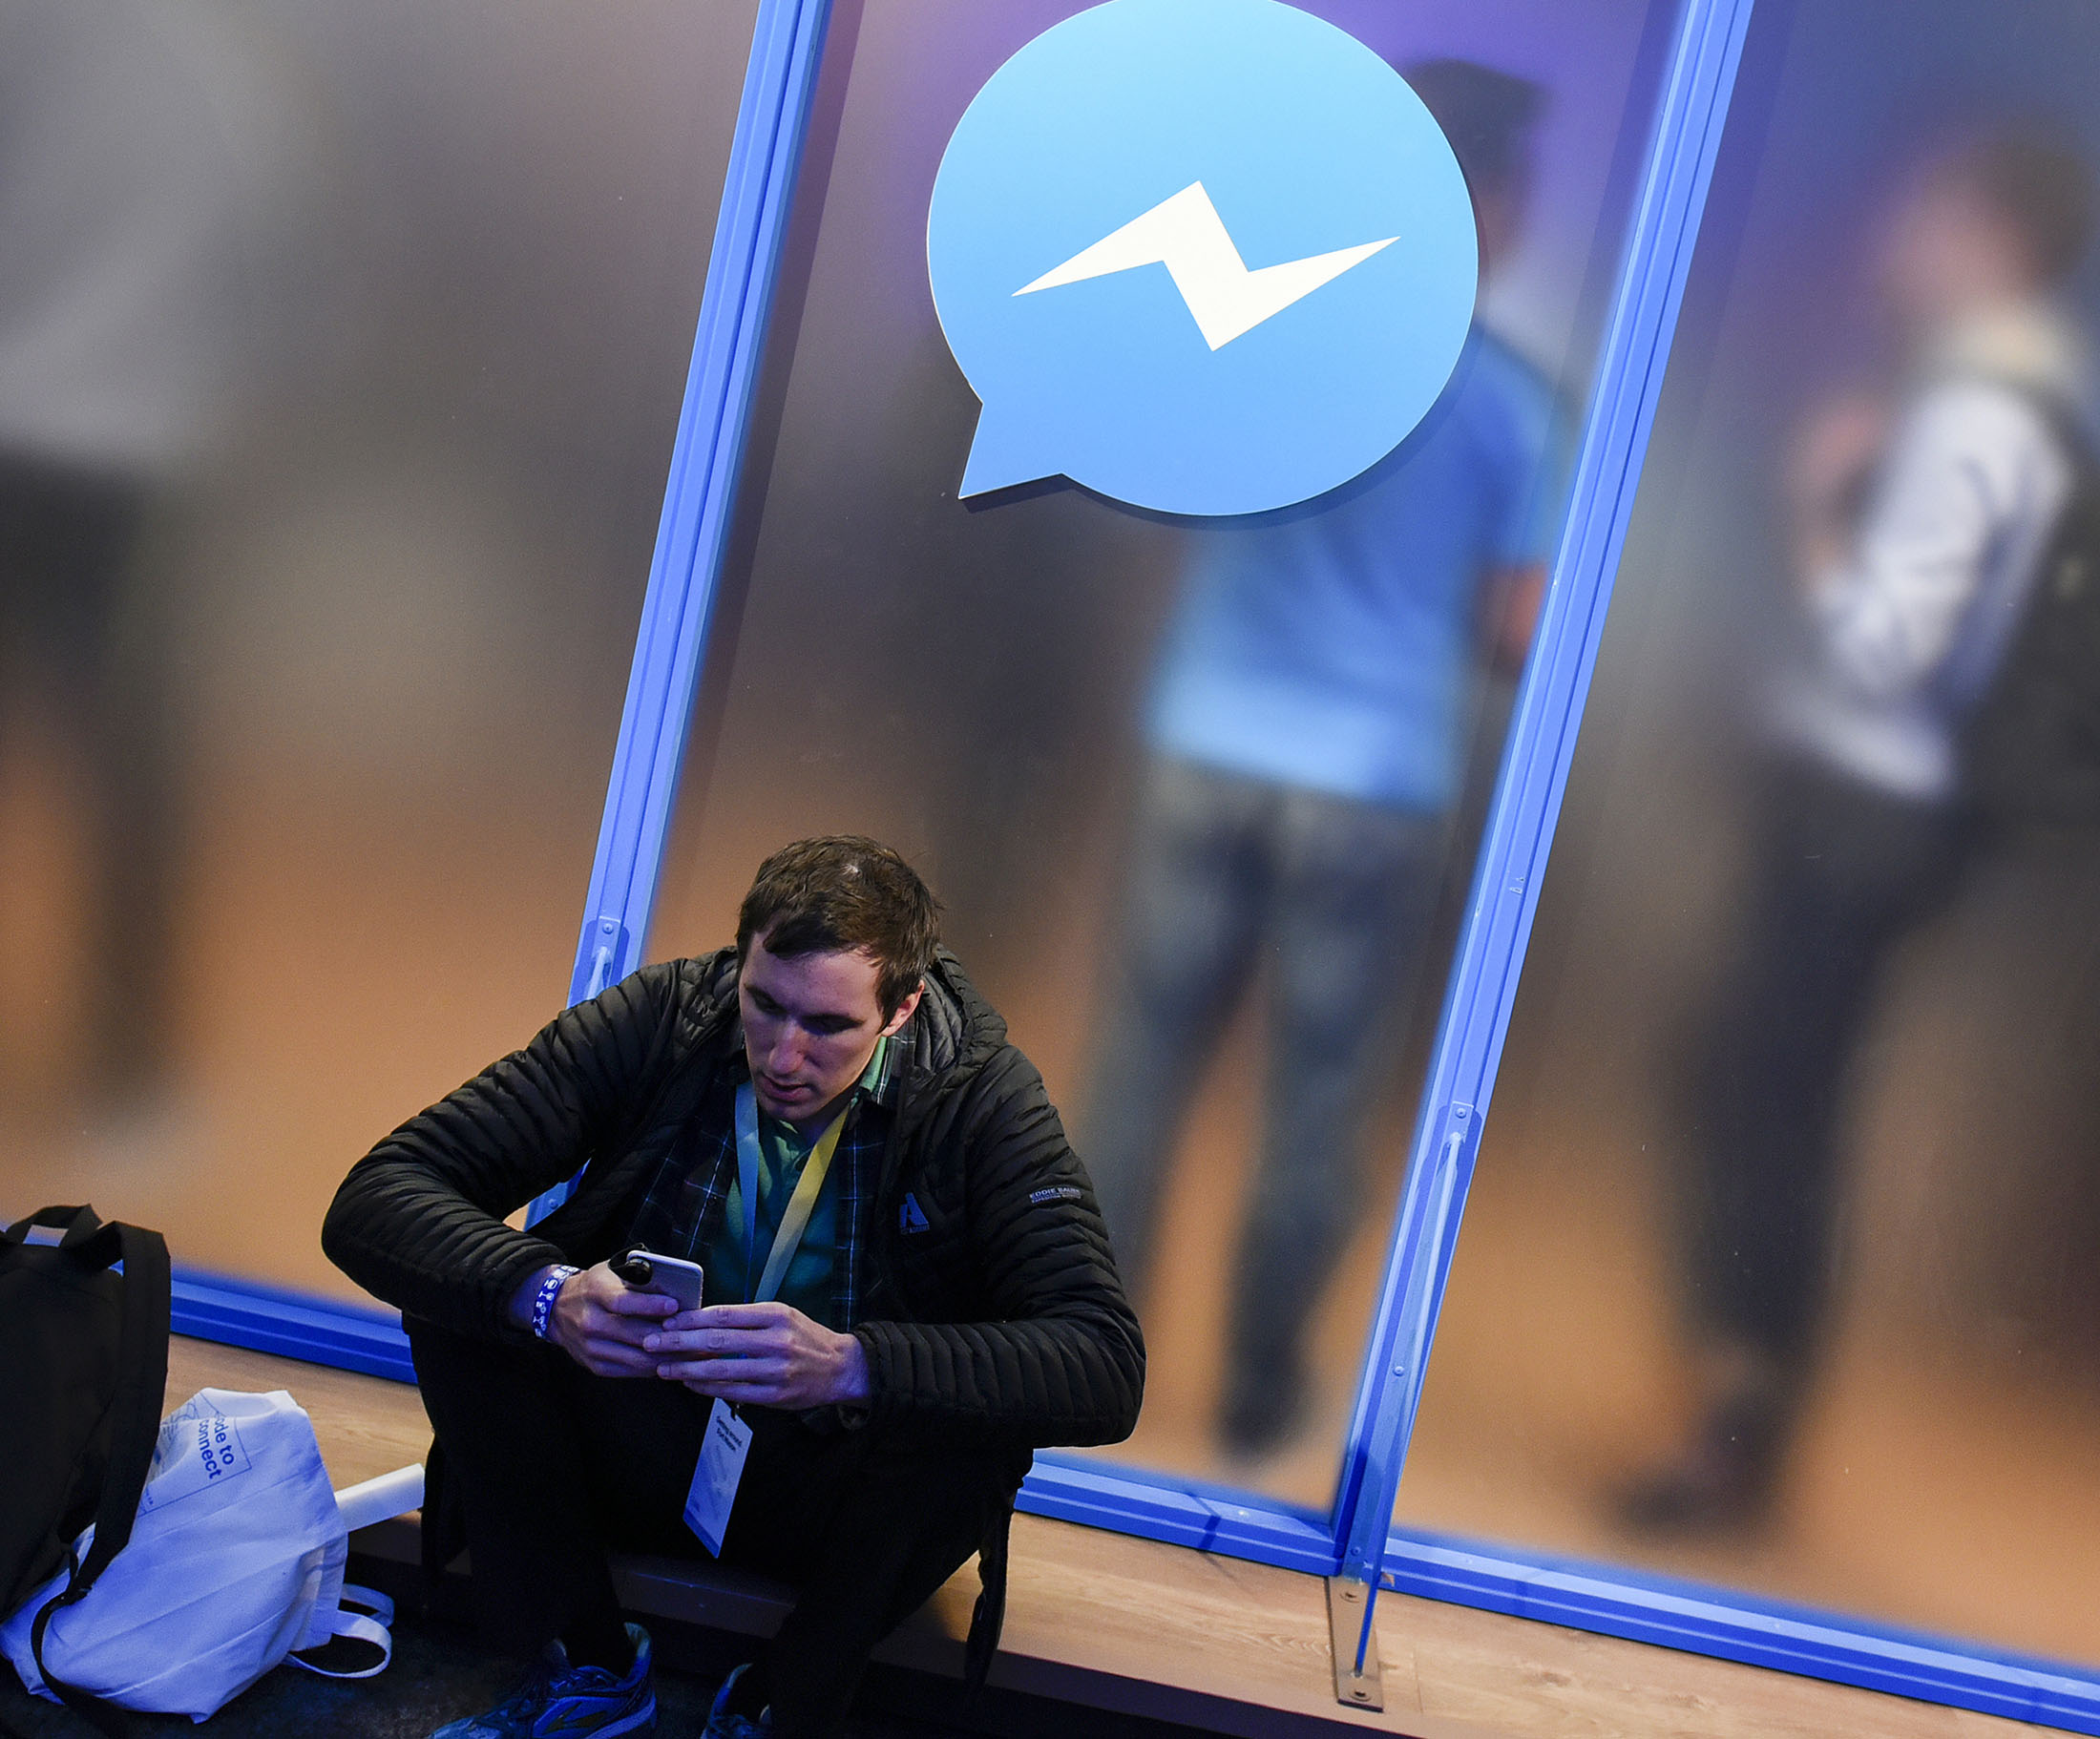 An attendee sits in front of a messenger logo during the Facebook F8 Developers Conference in San Francisco, California.
